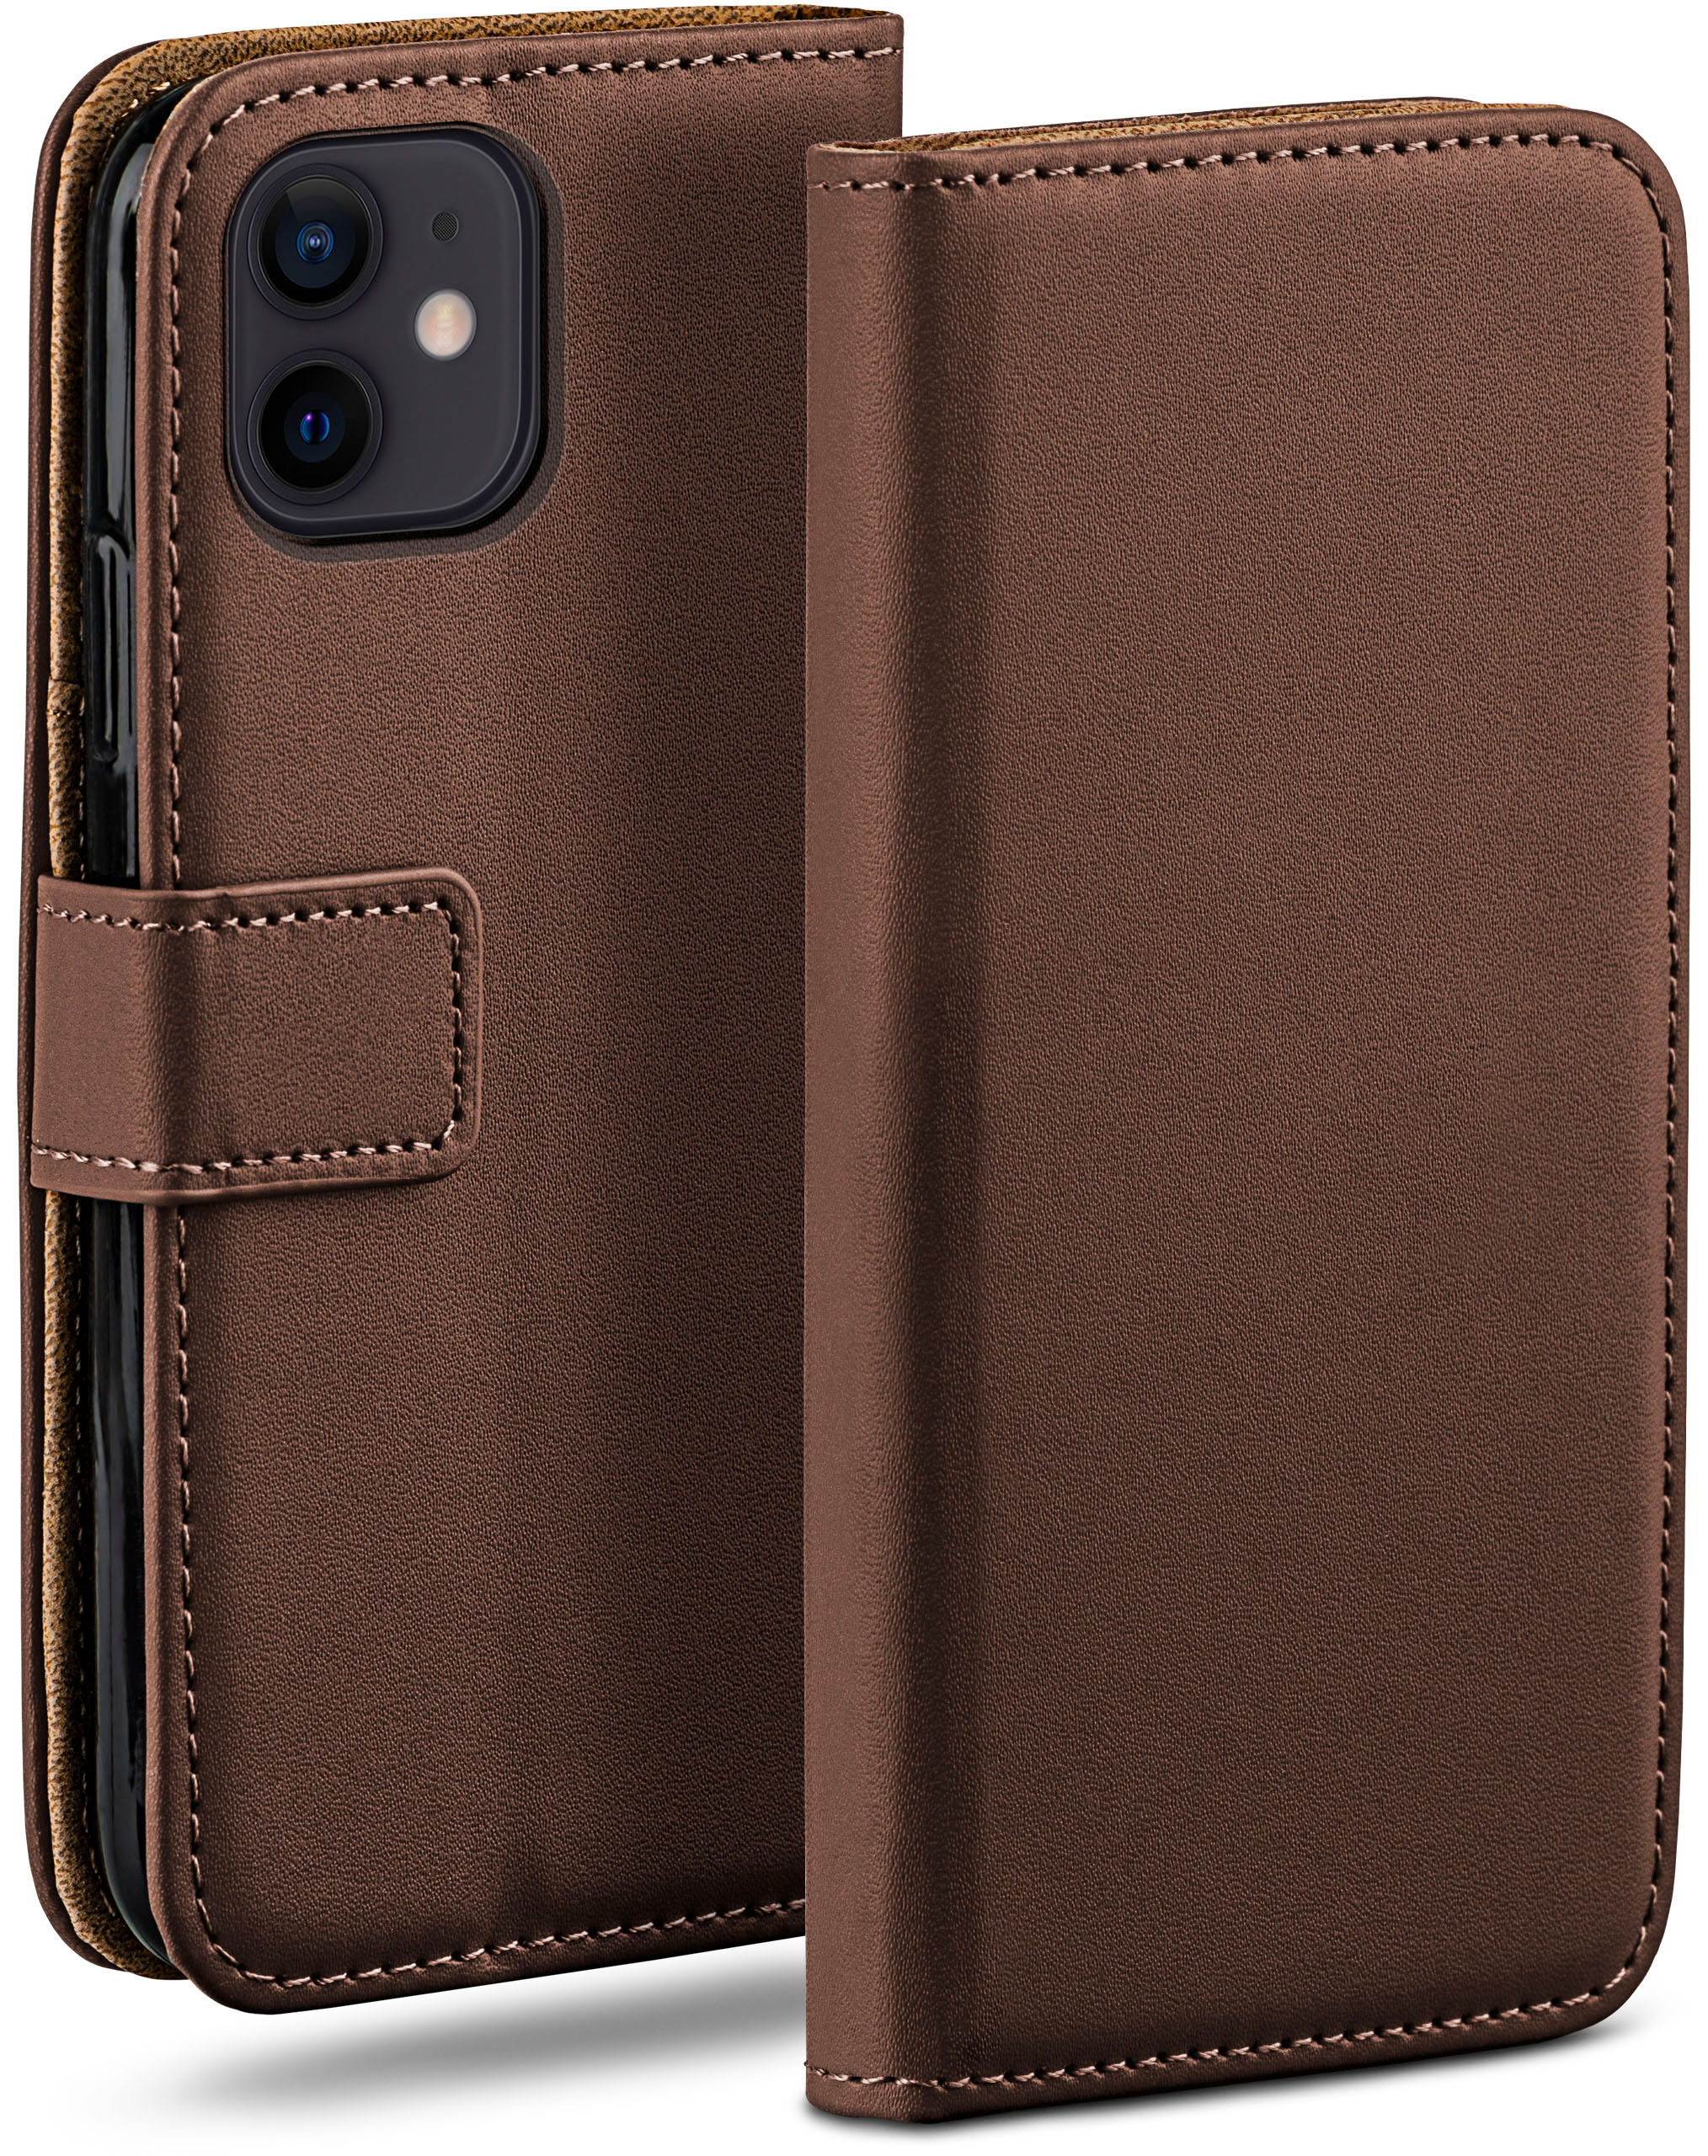 Case, Bookcover, Book MOEX iPhone 12, Apple, Oxide-Brown